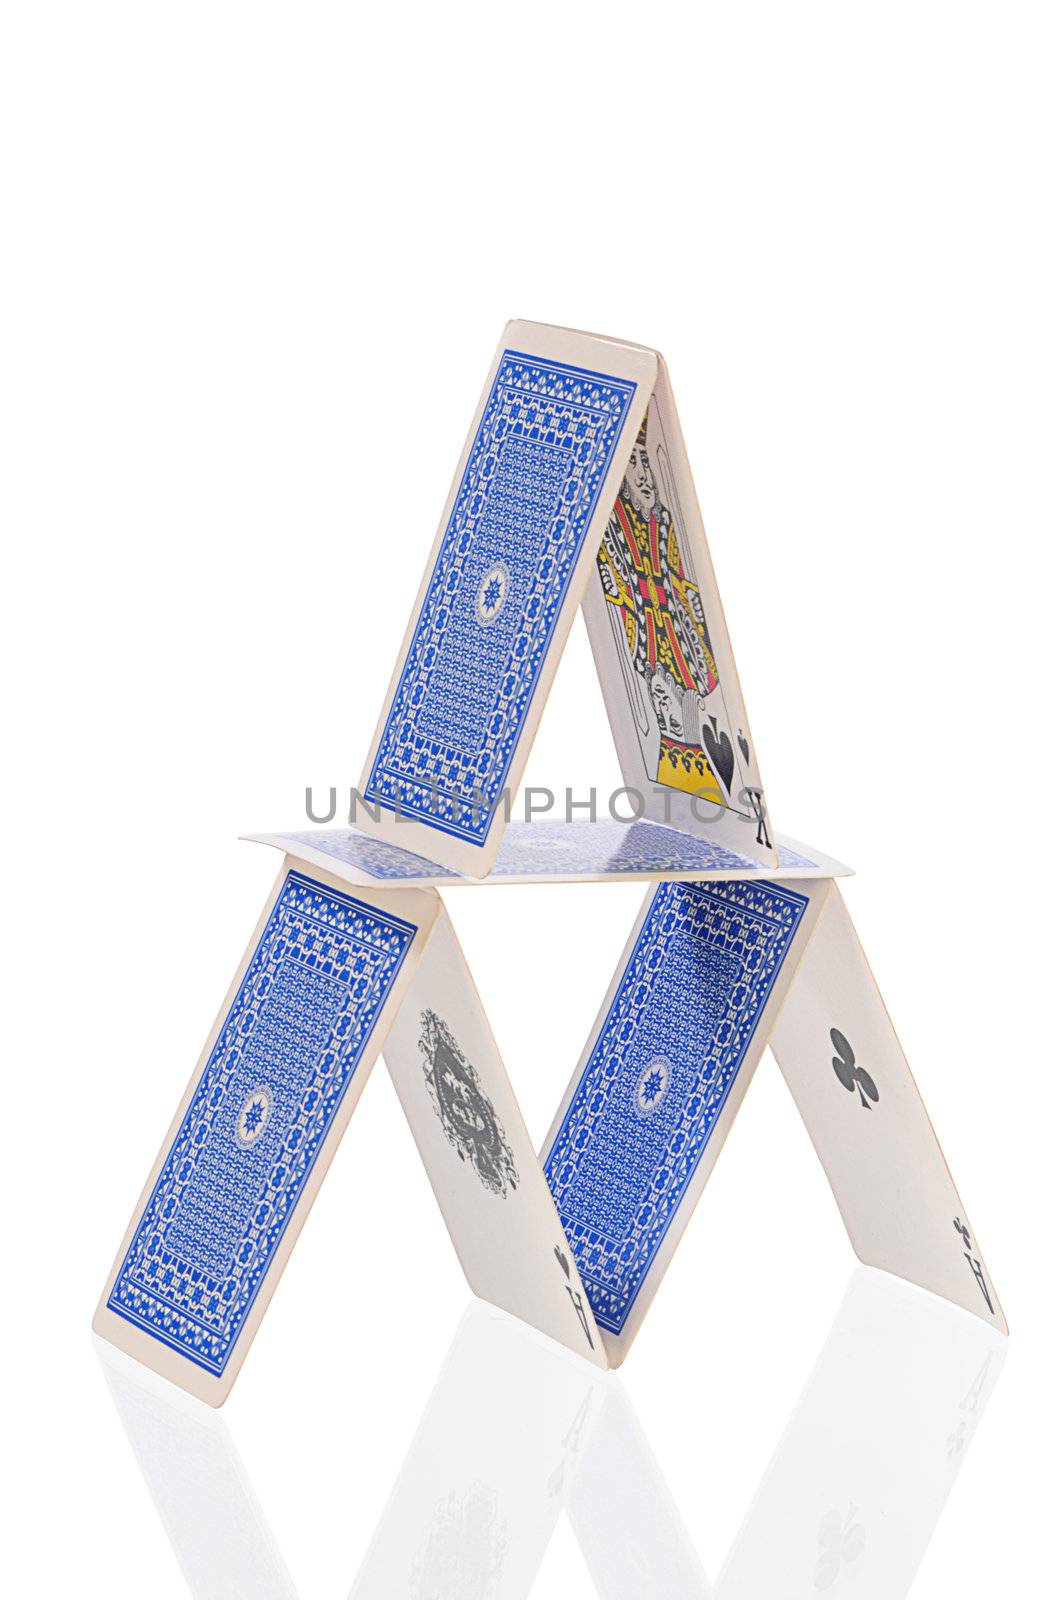 rickety structure from playing-cards on white